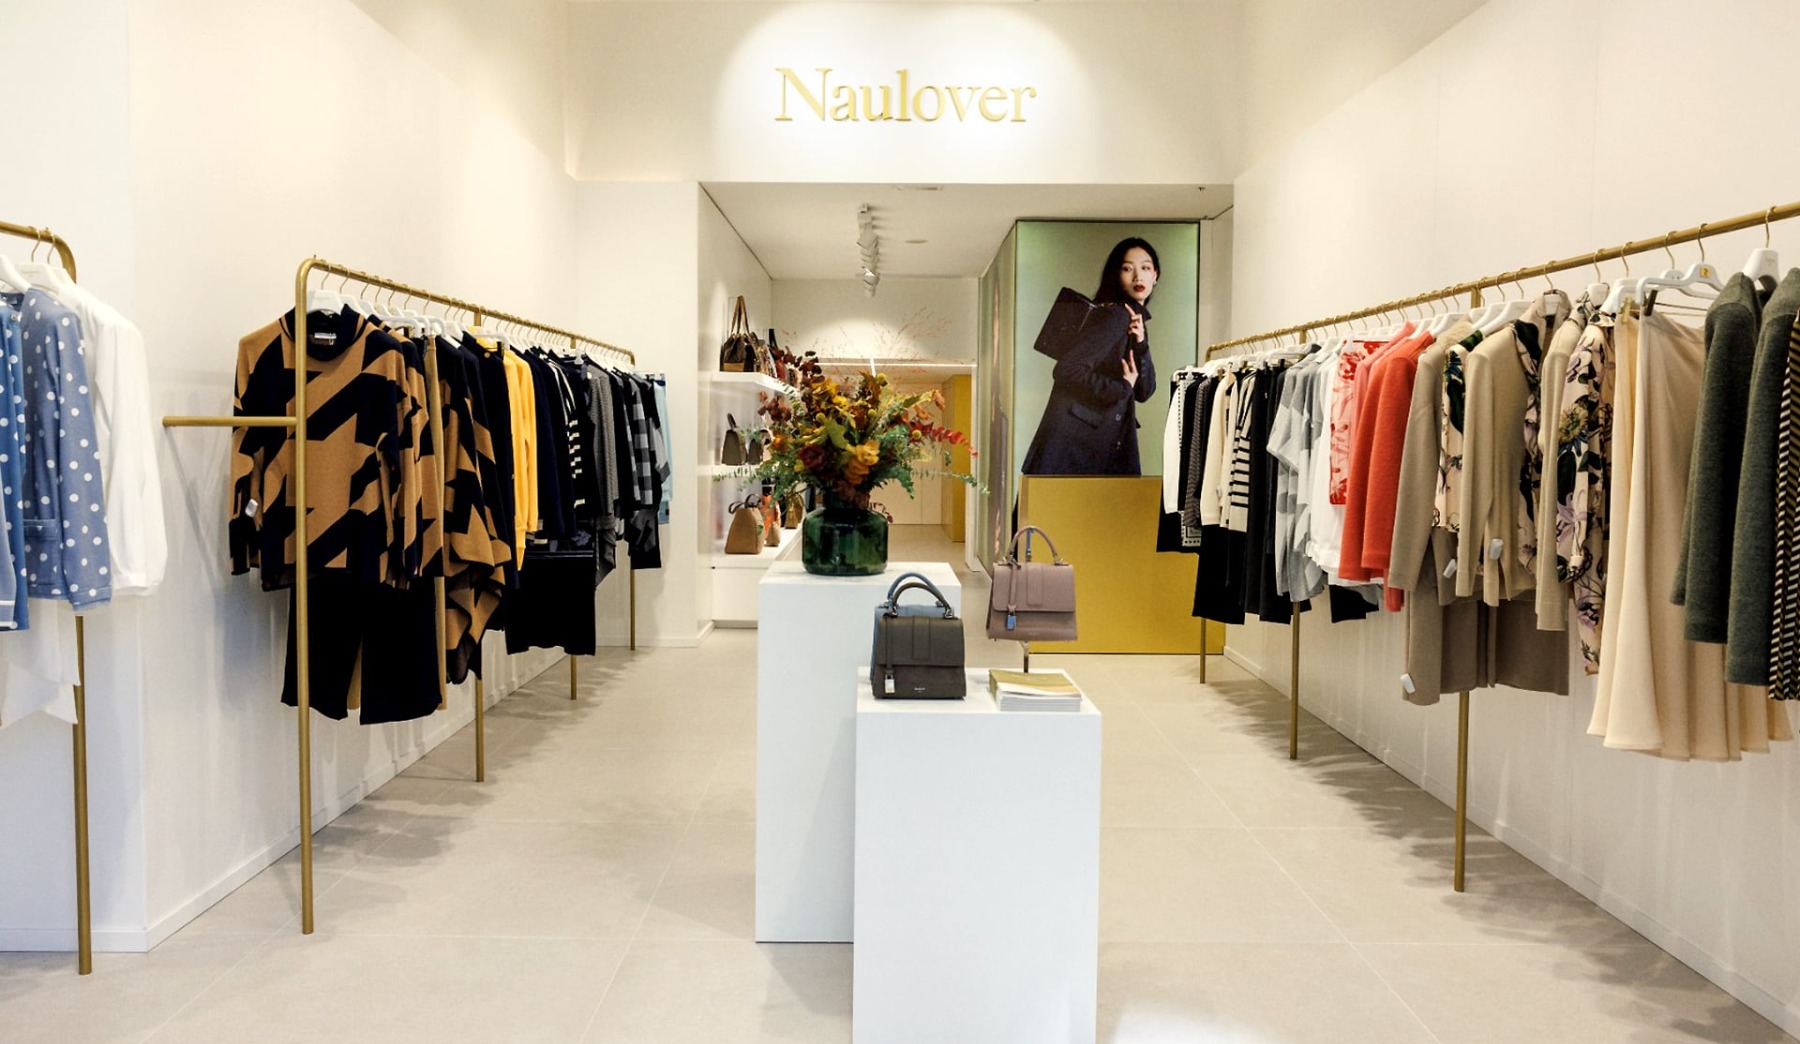 Discover NAULOVER